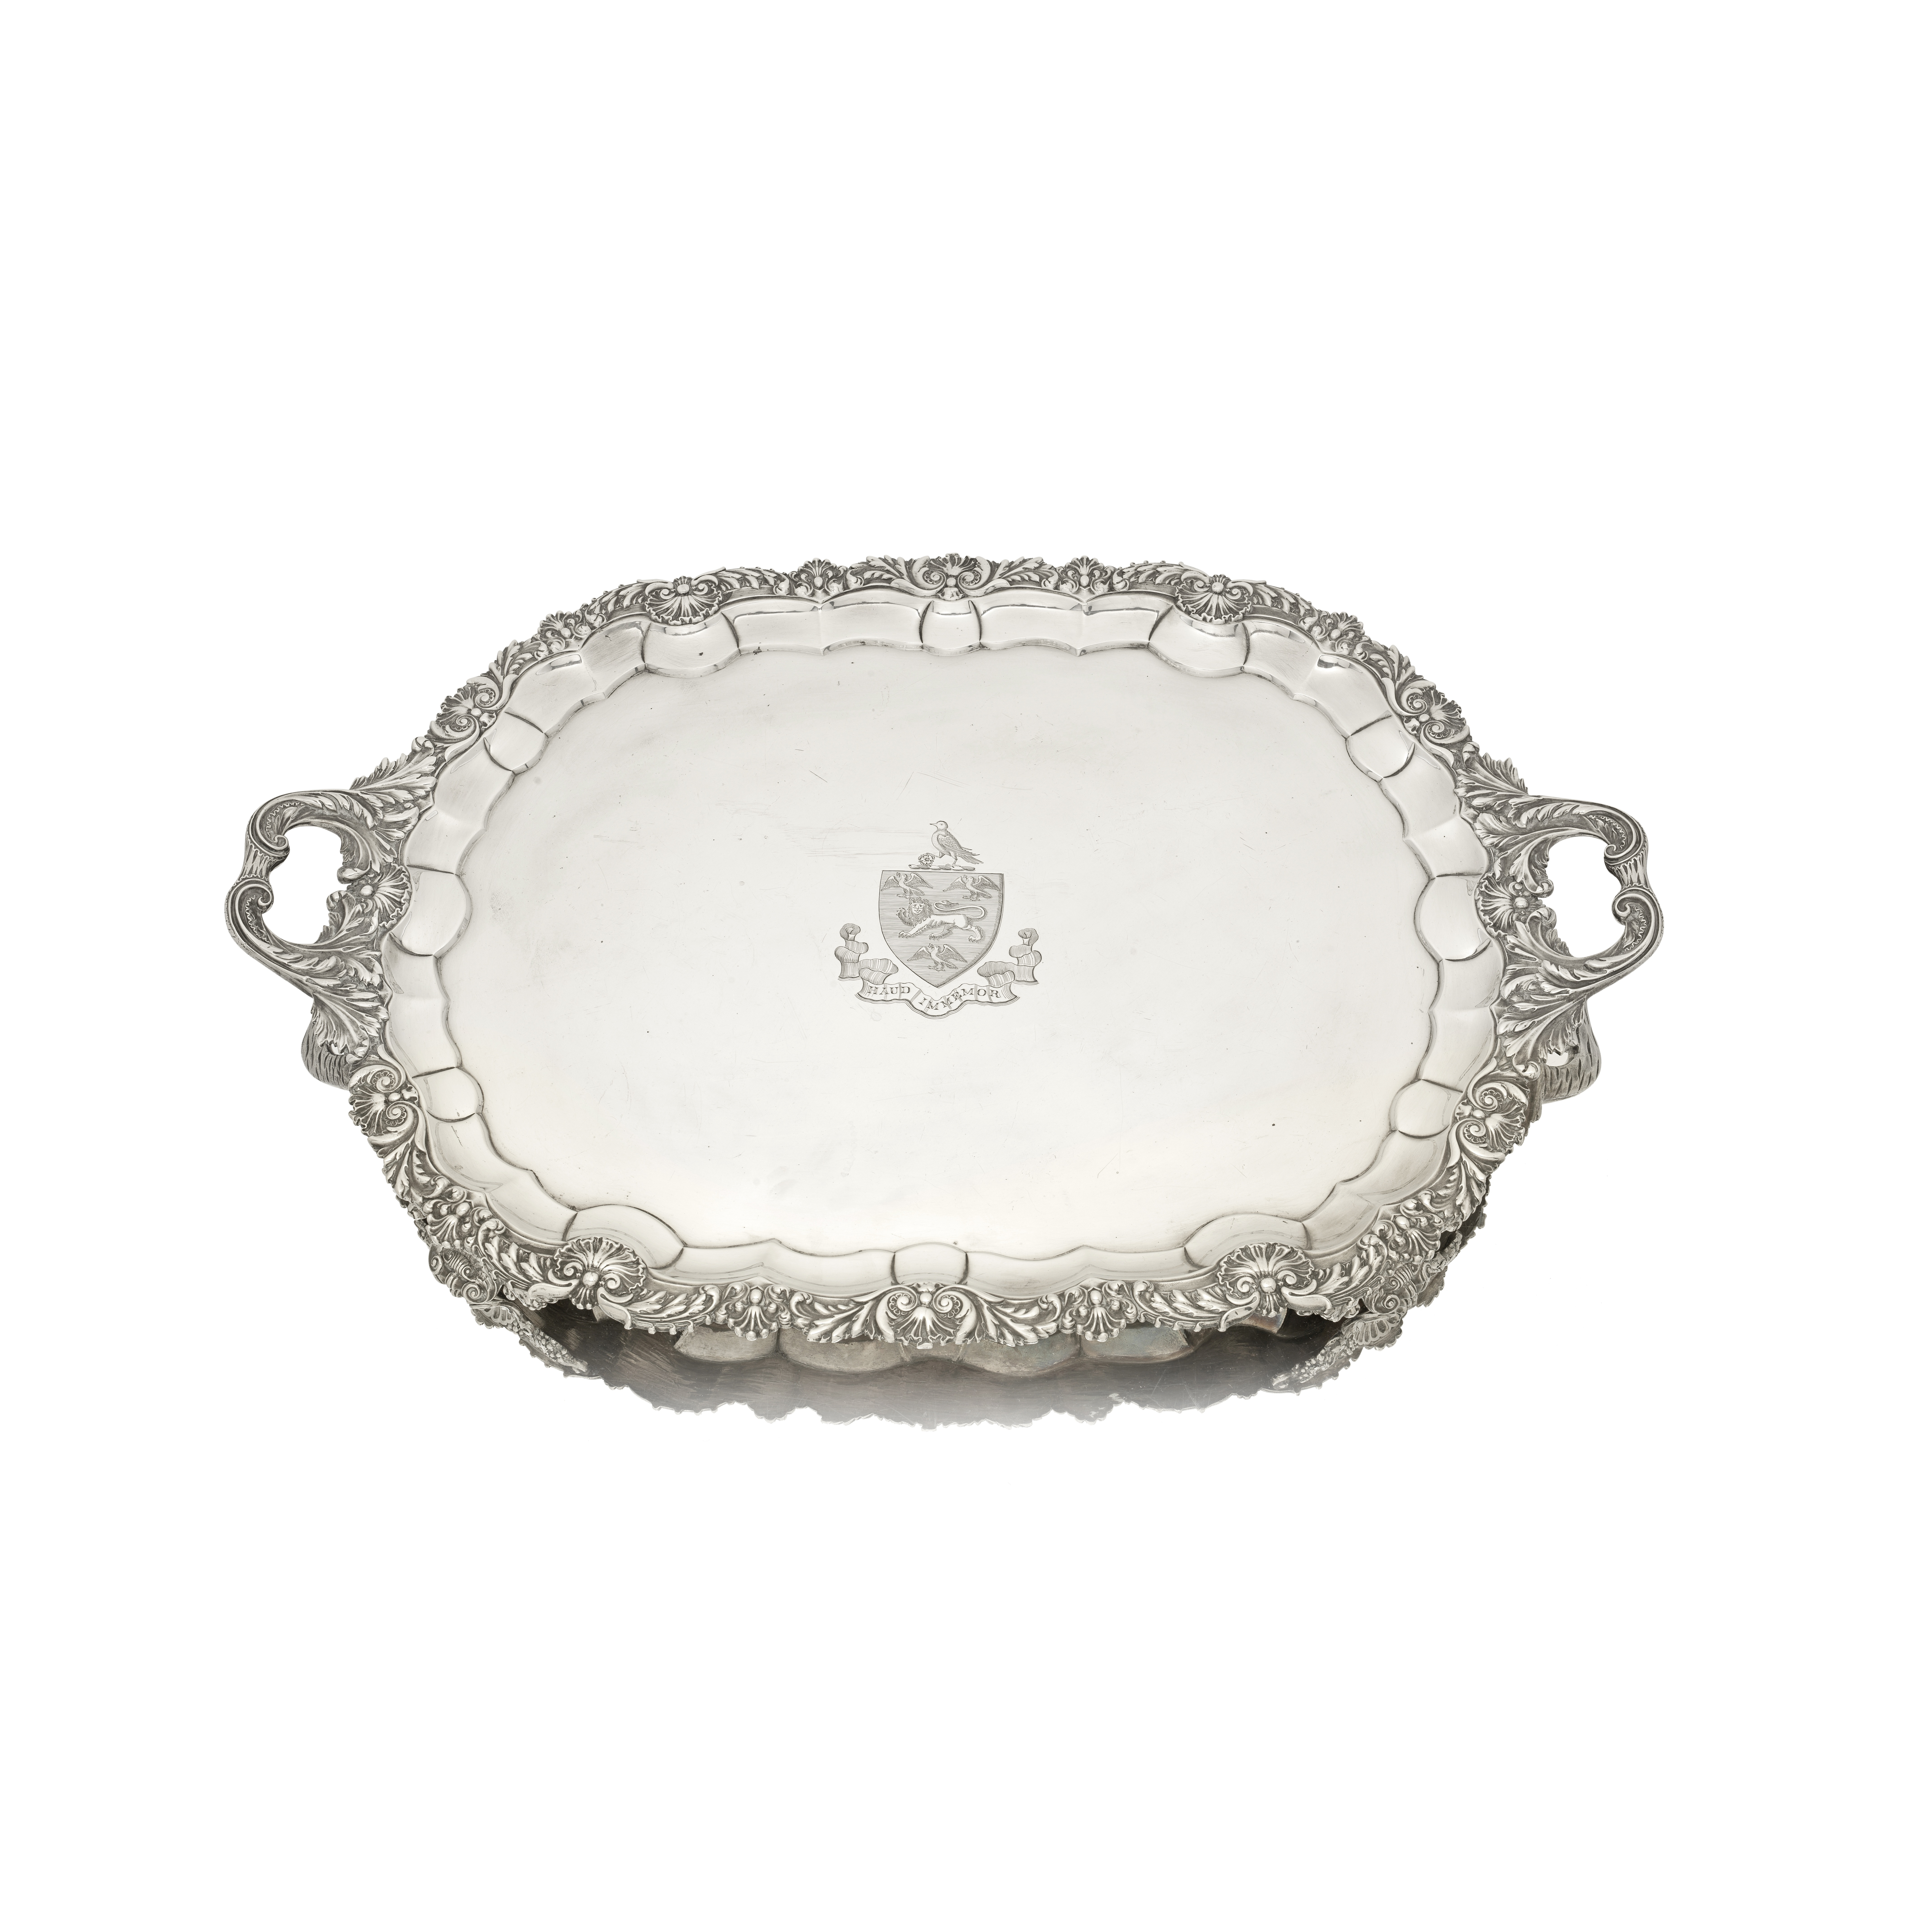 A George IV large silver two-handled tray Benjamin Smith, London 1822